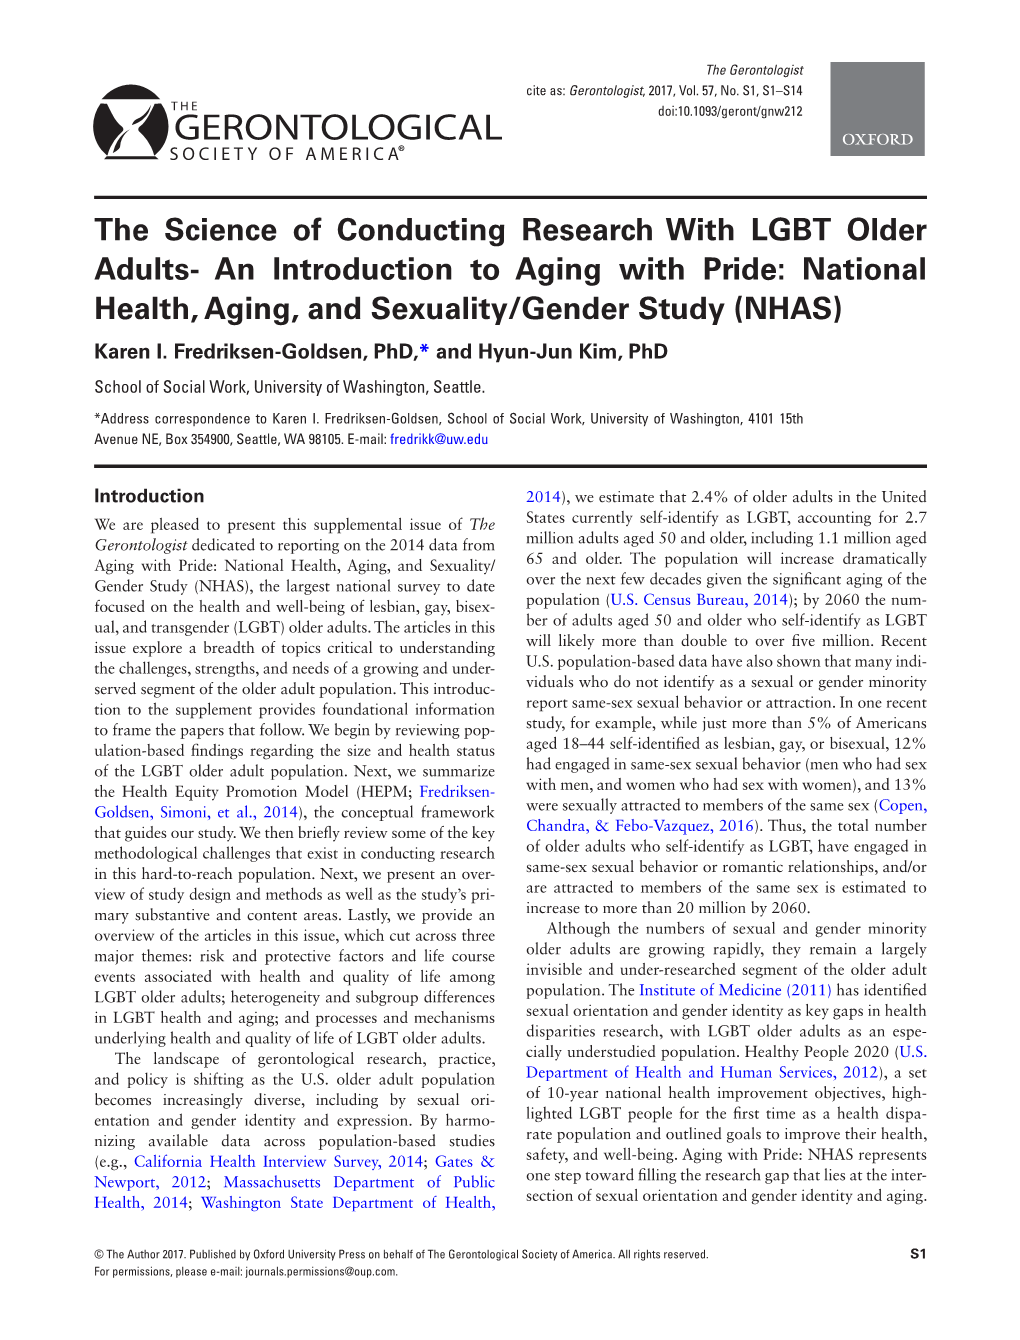 National Health, Aging, and Sexuality/Gender Study (NHAS) Karen I